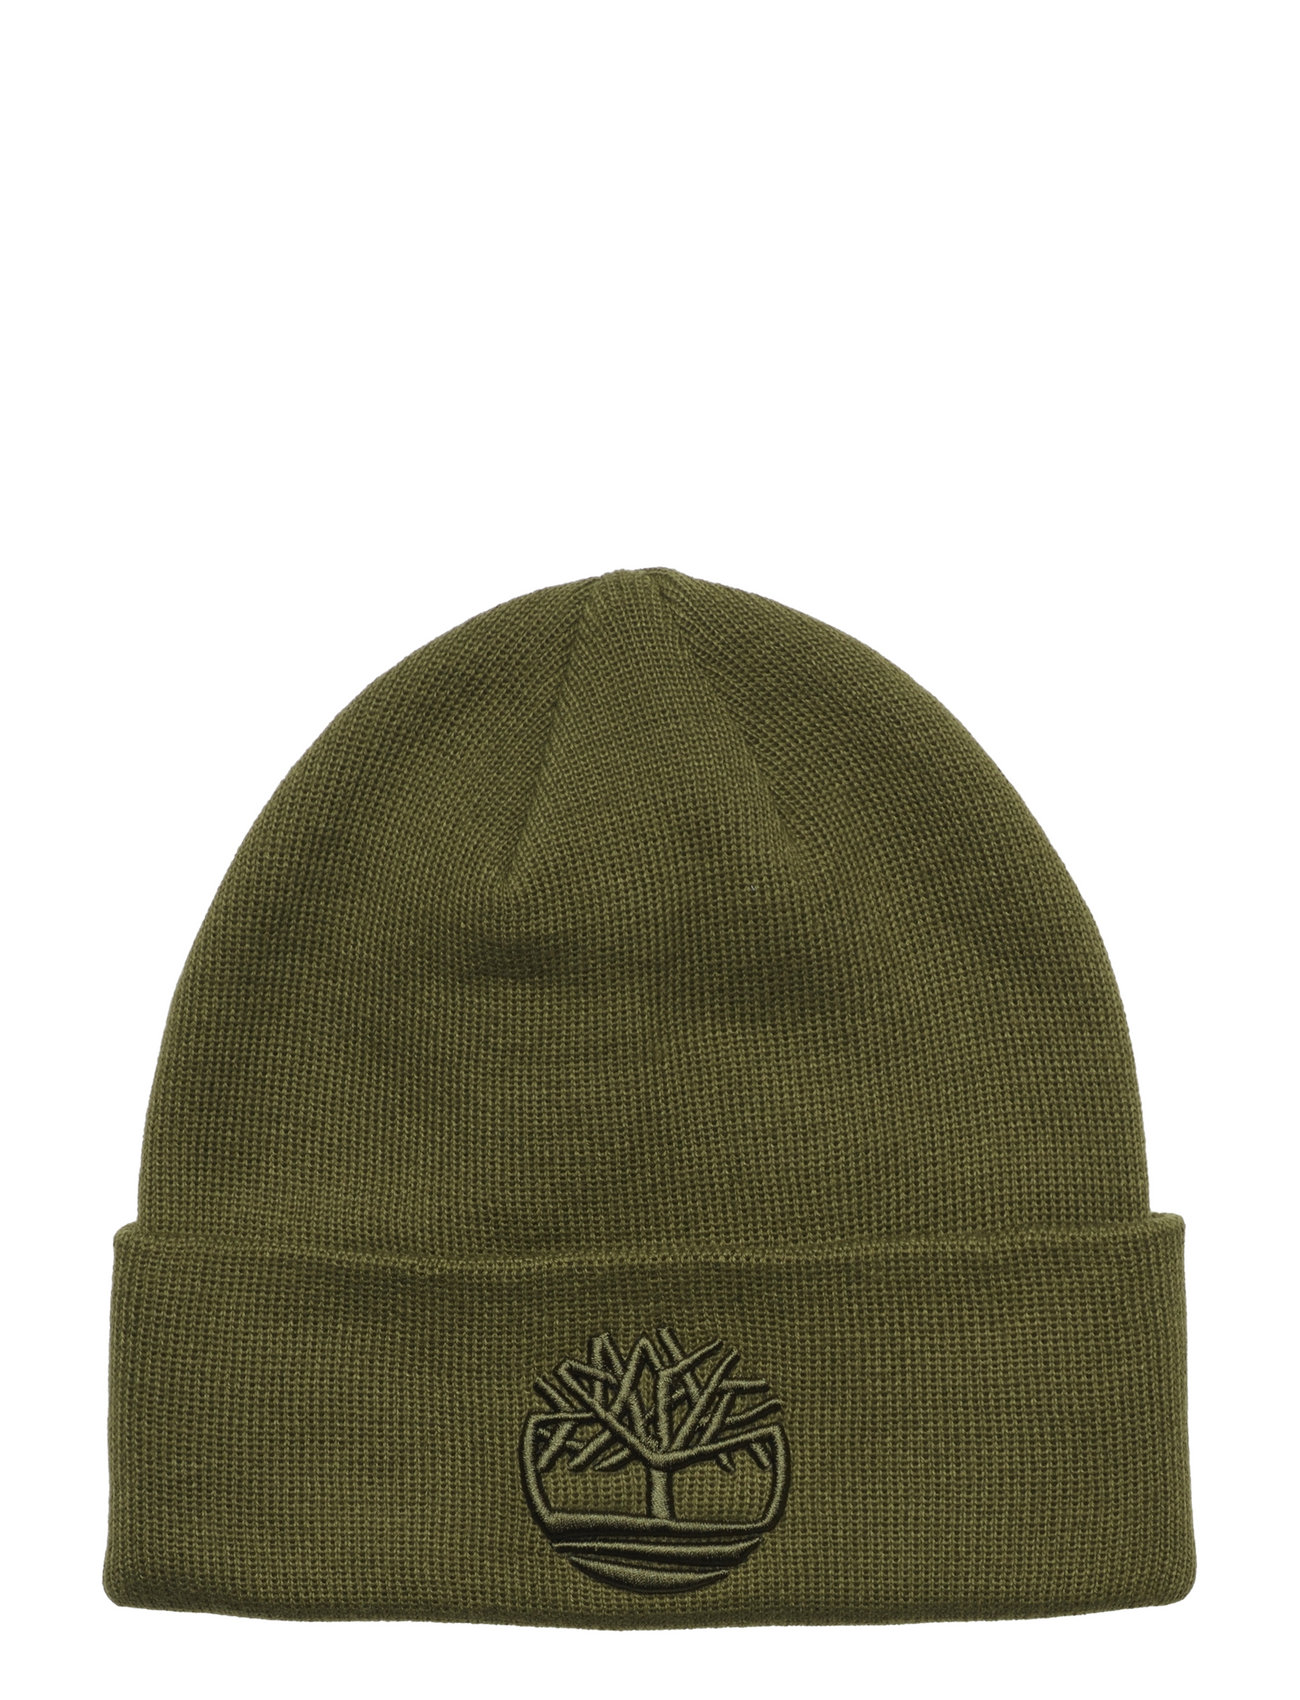 Timberland Tonal - Embroidery Hats Beanie 3d